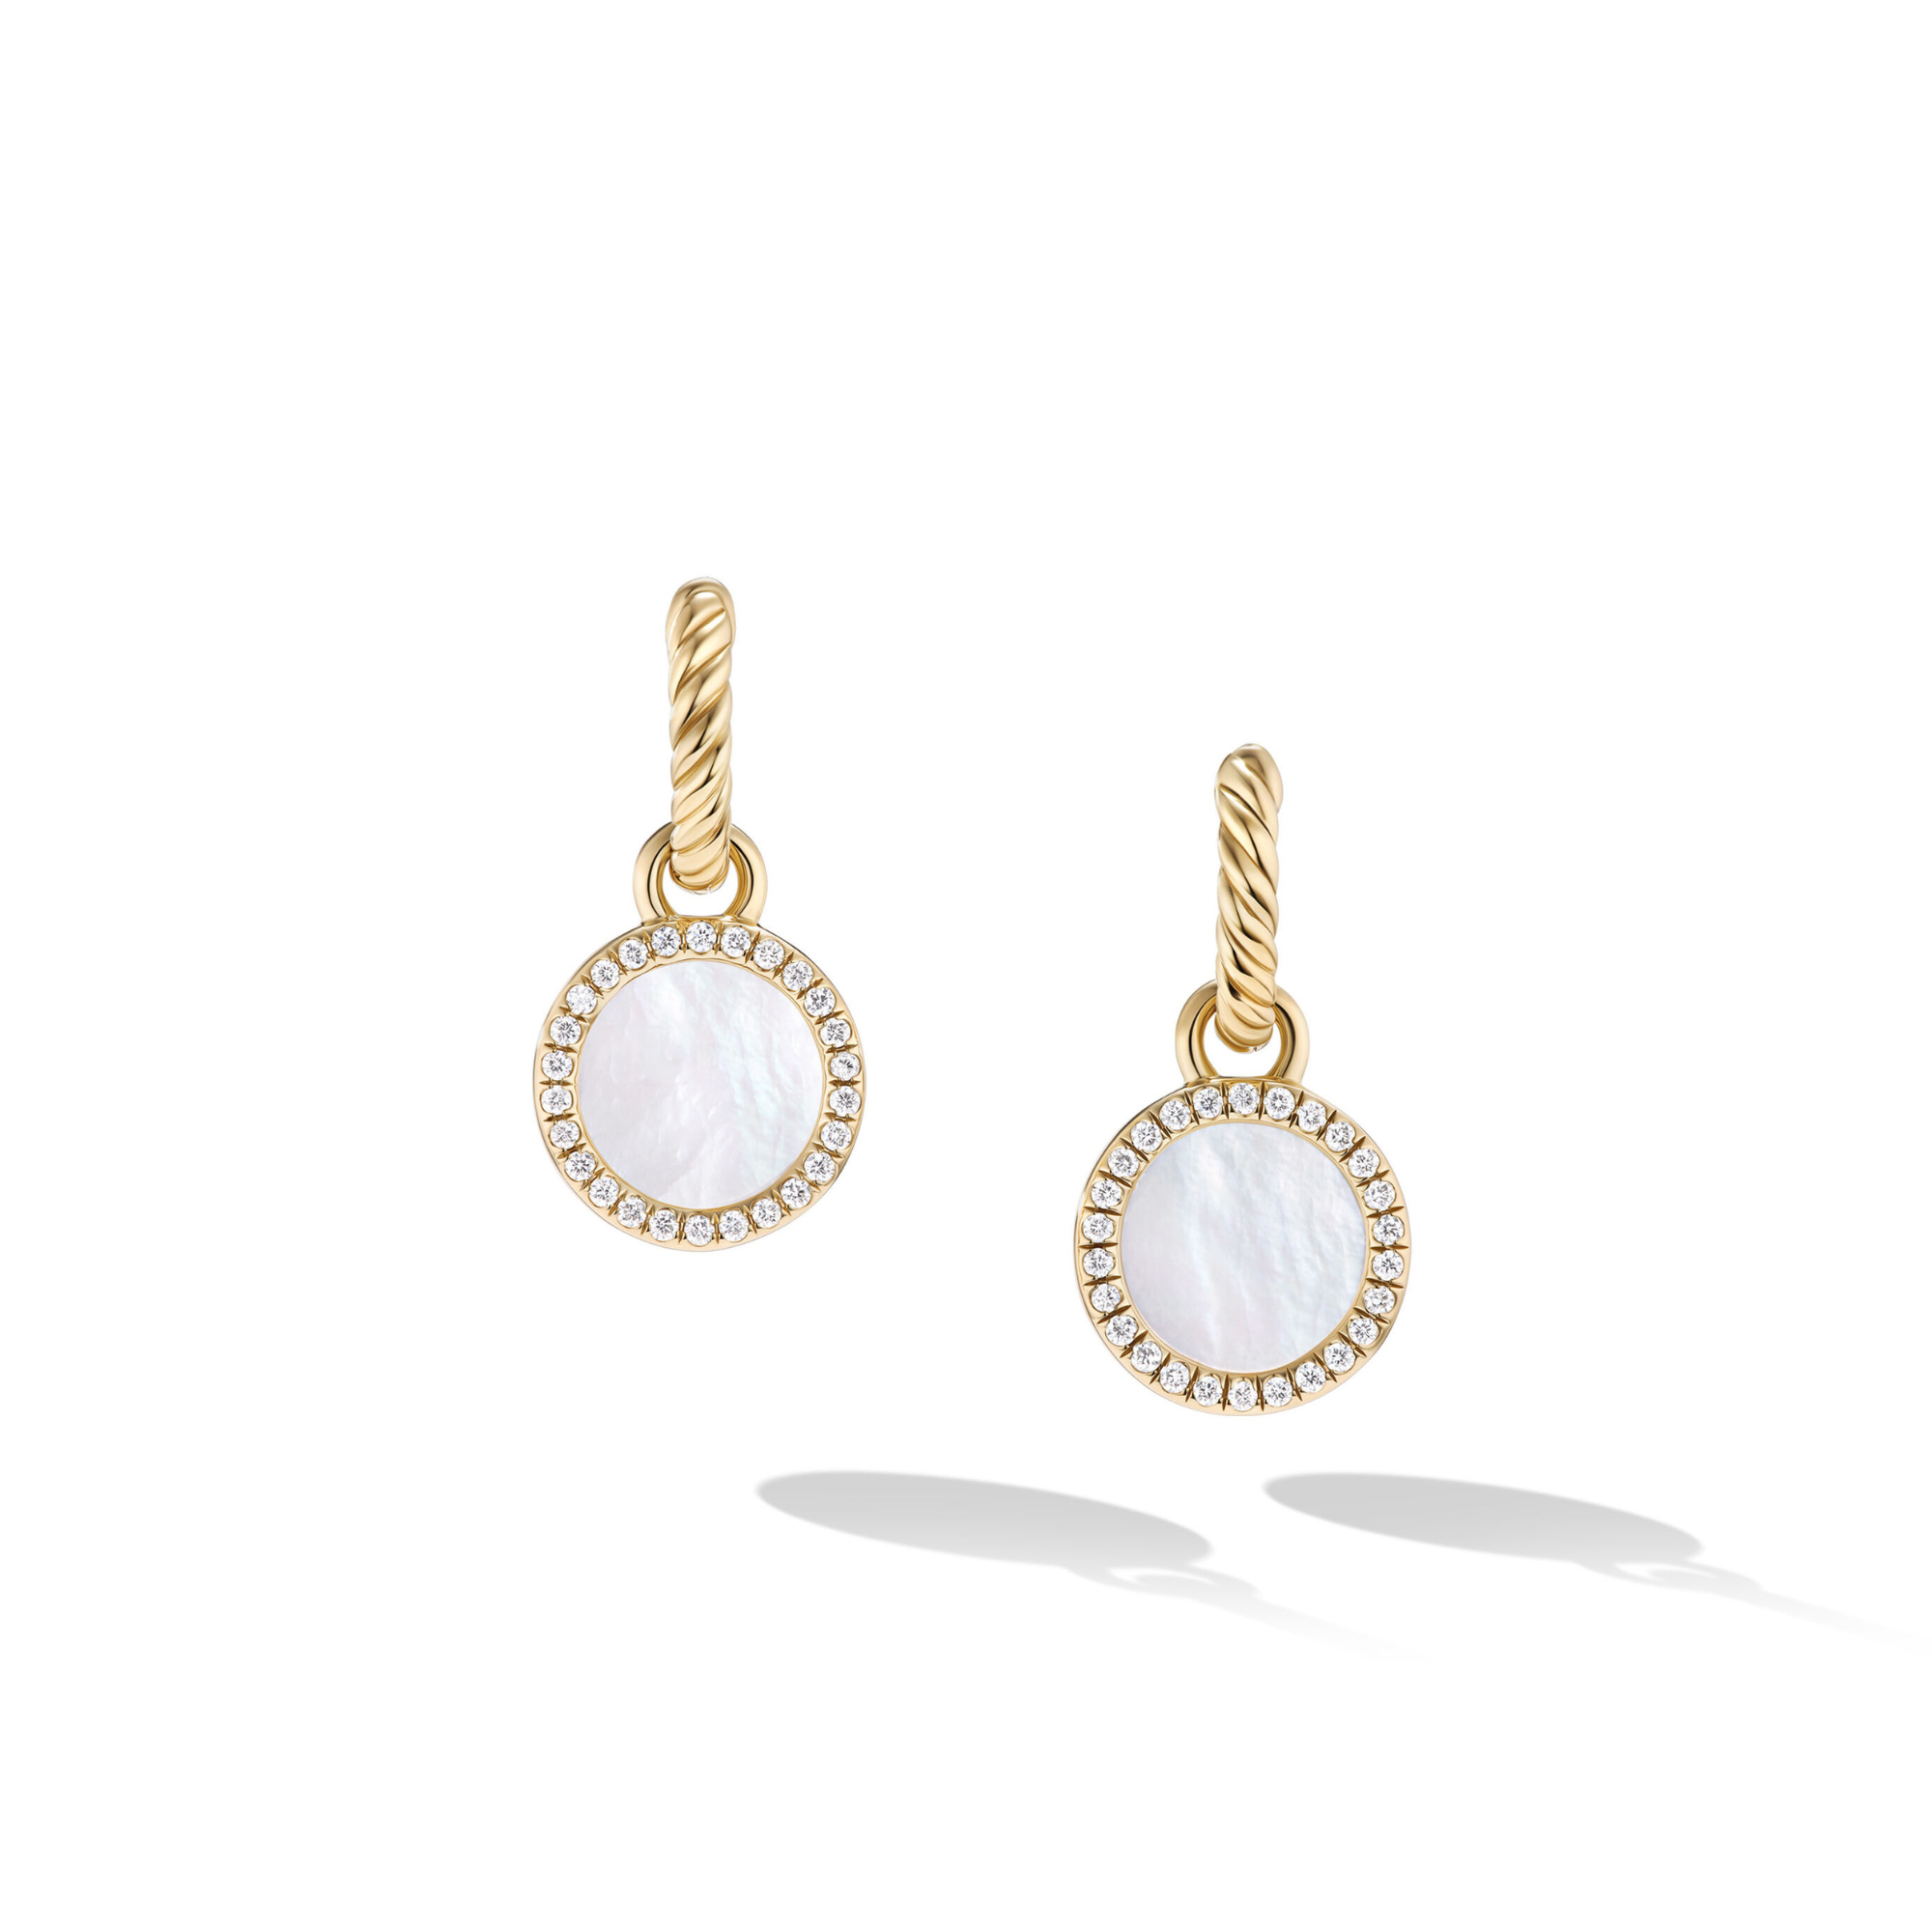 Petite DY Elements® Drop Earrings in 18CT Yellow Gold with Mother of Pearl and Pavé Diamonds